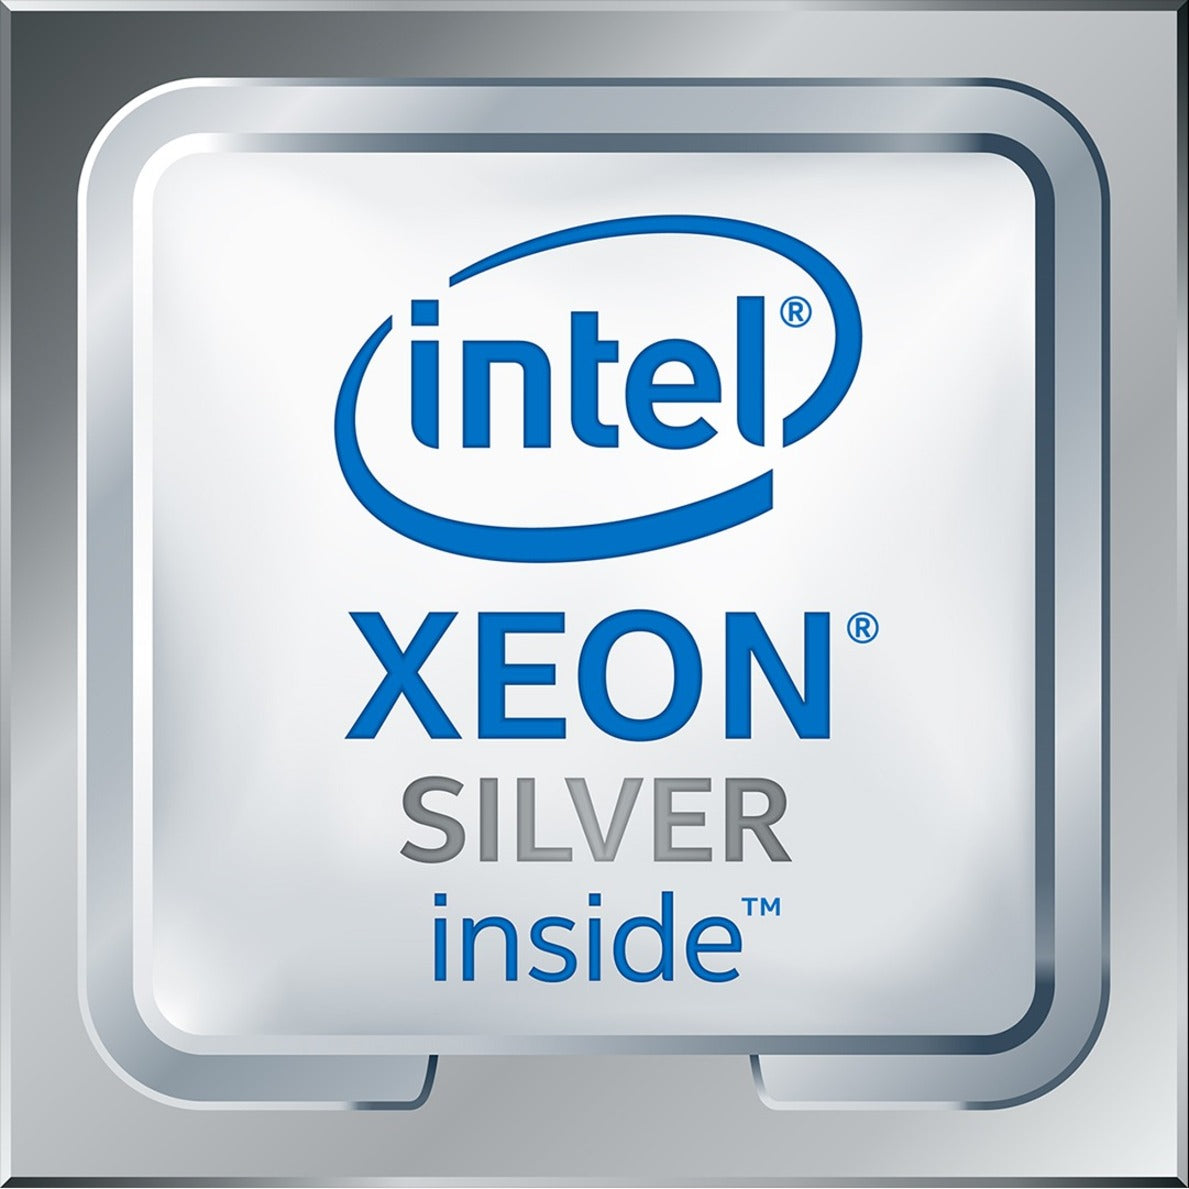 Lenovo 7XG7A05578 Xeon Silver Deca-core 4114 2.20GHz Server Processor Upgrade, Powerful and Efficient Performance